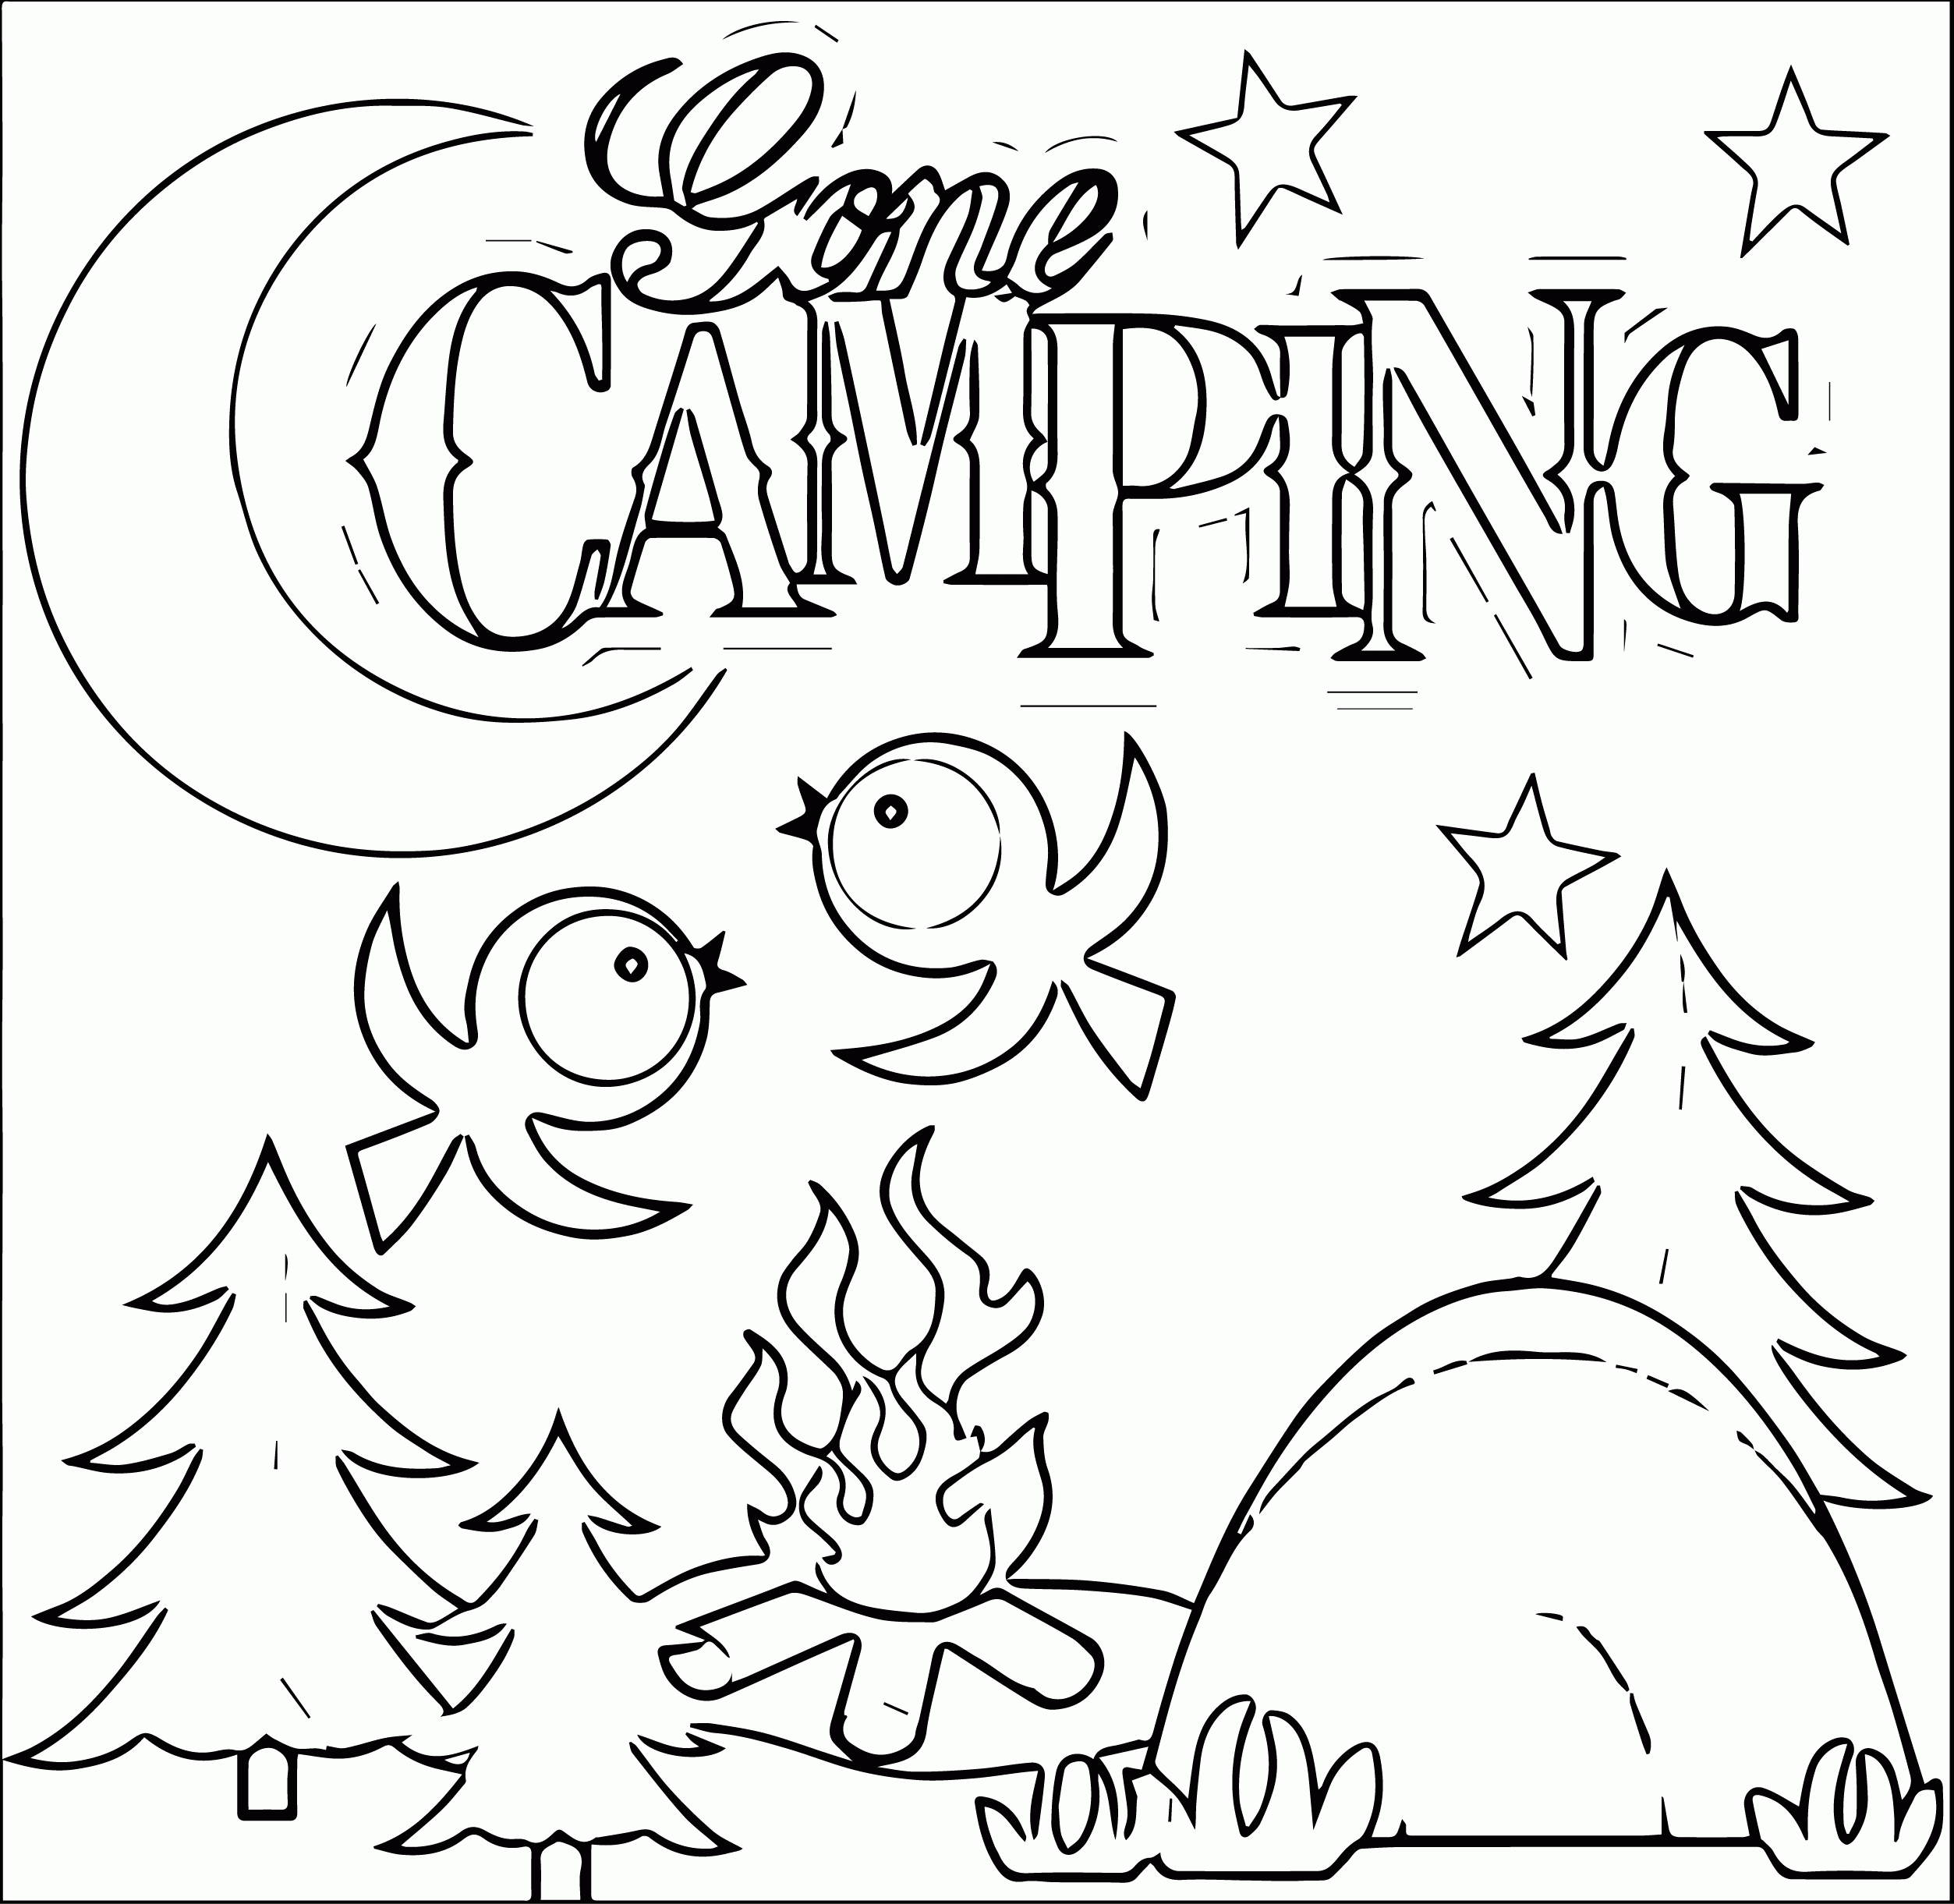 camp coloring pages camping coloring pages best coloring pages for kids camp coloring pages 